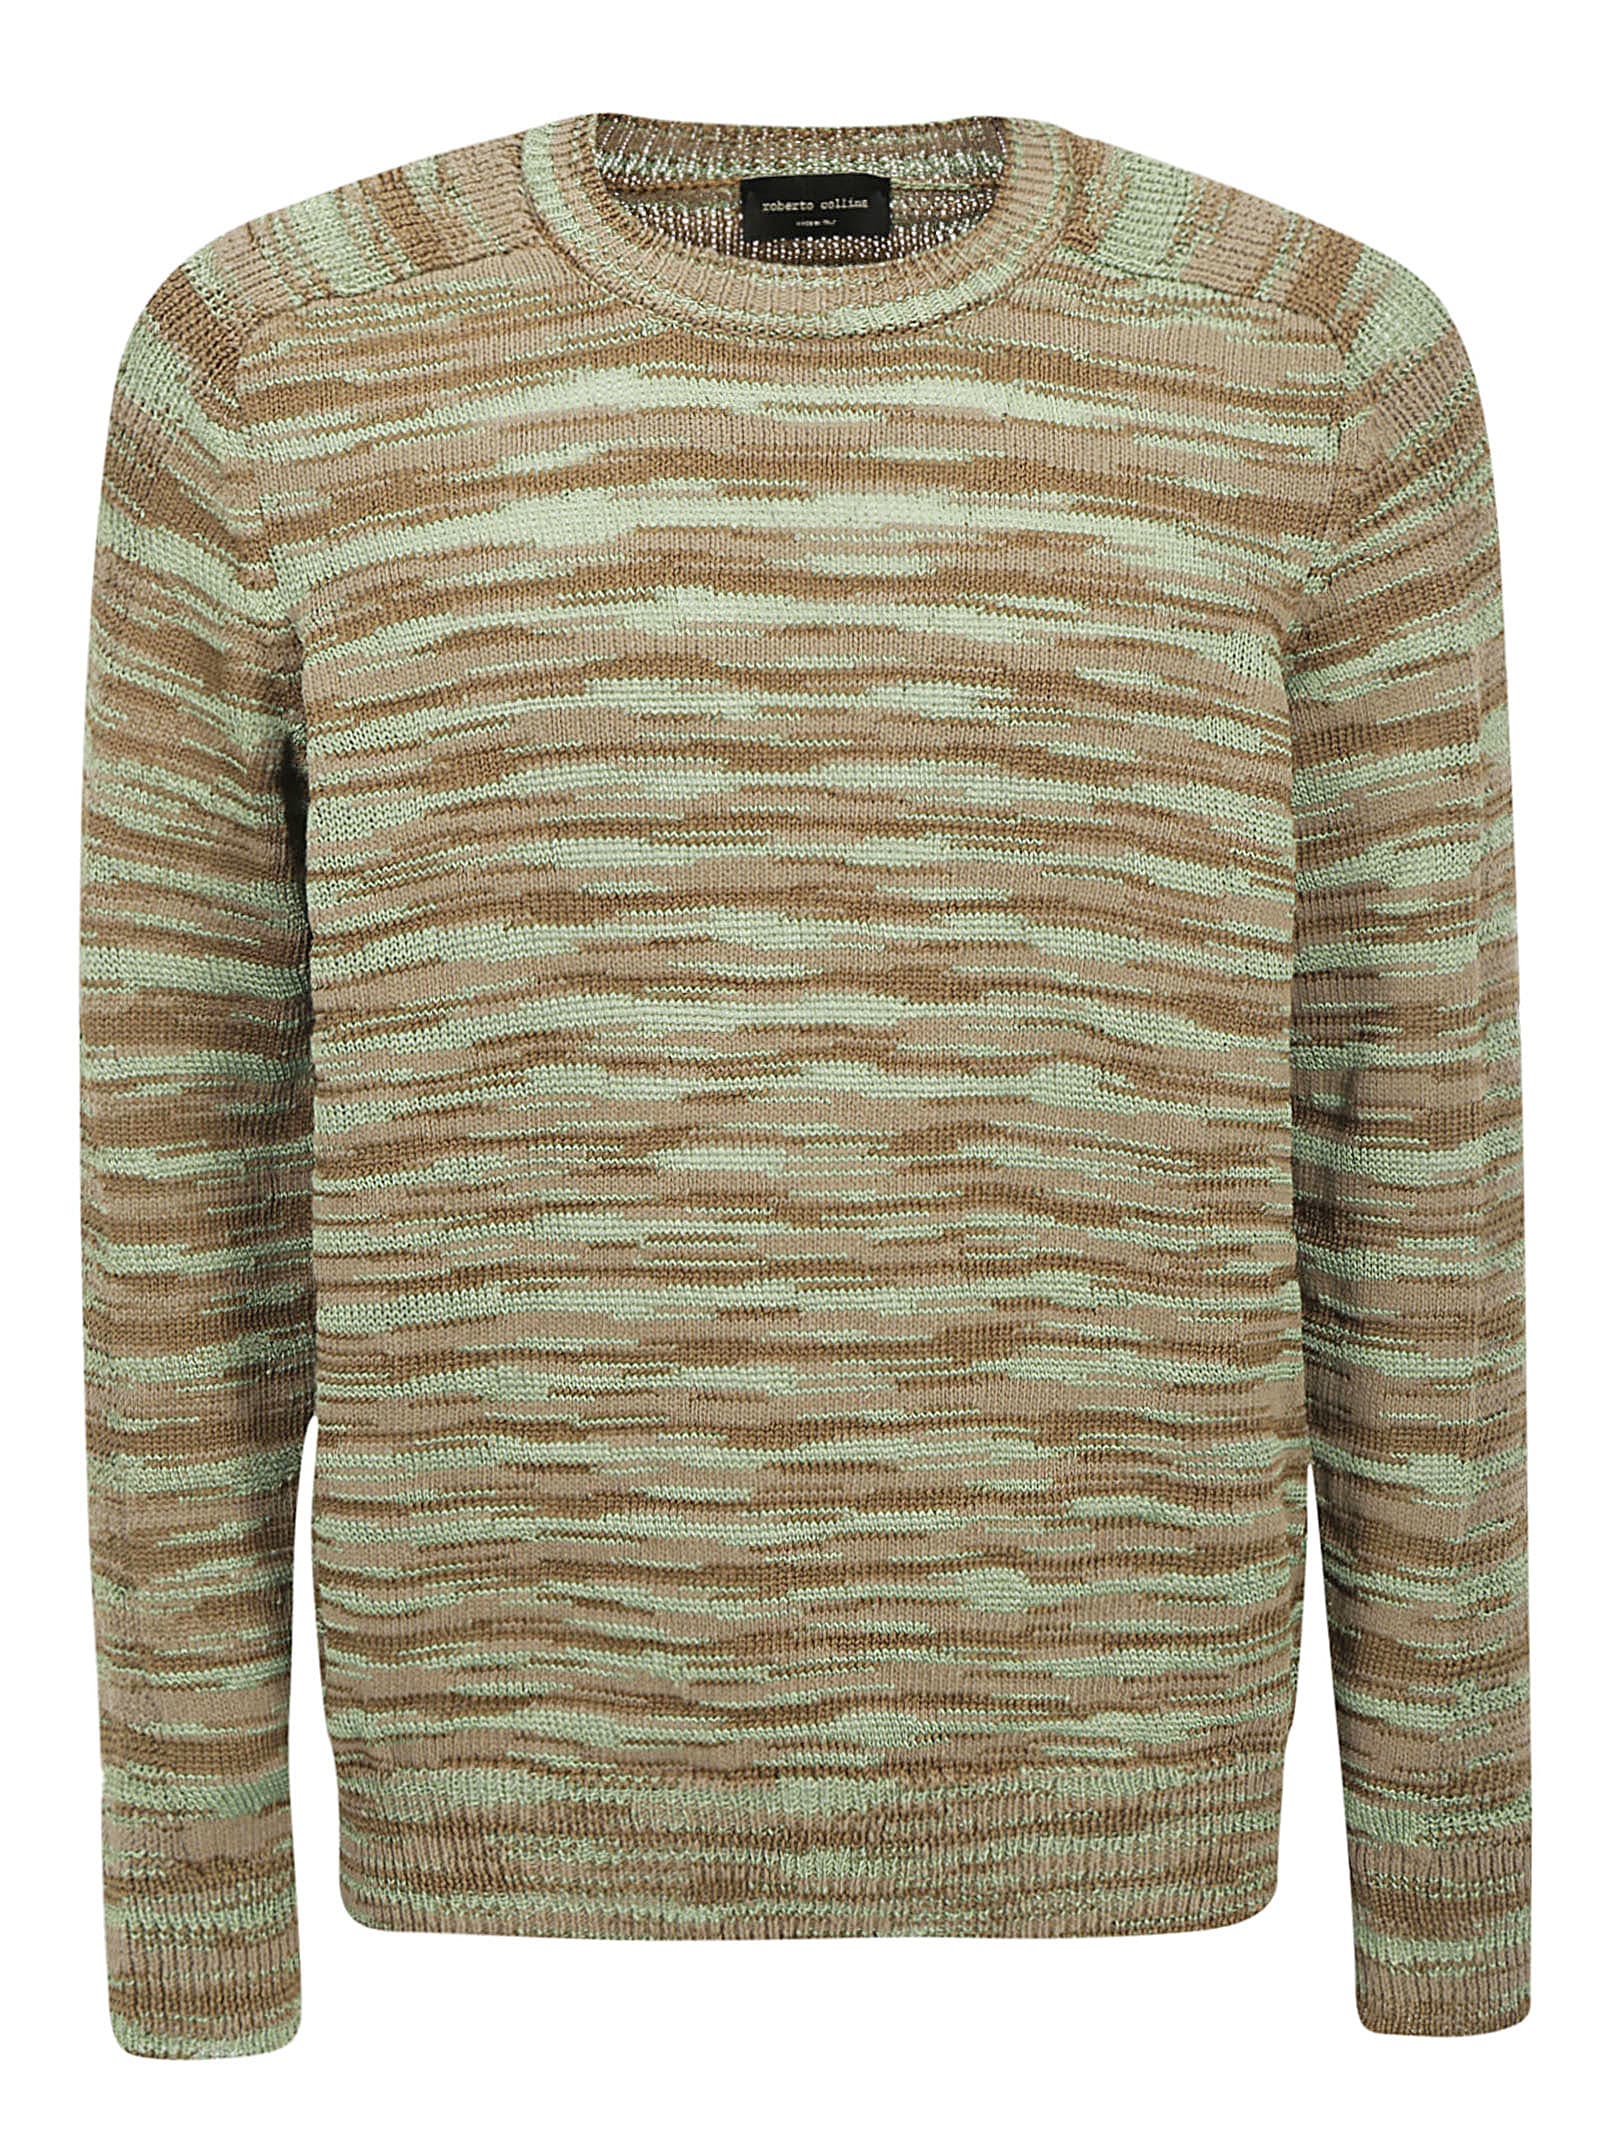 dressing gownRTO COLLINA jumper,11277440